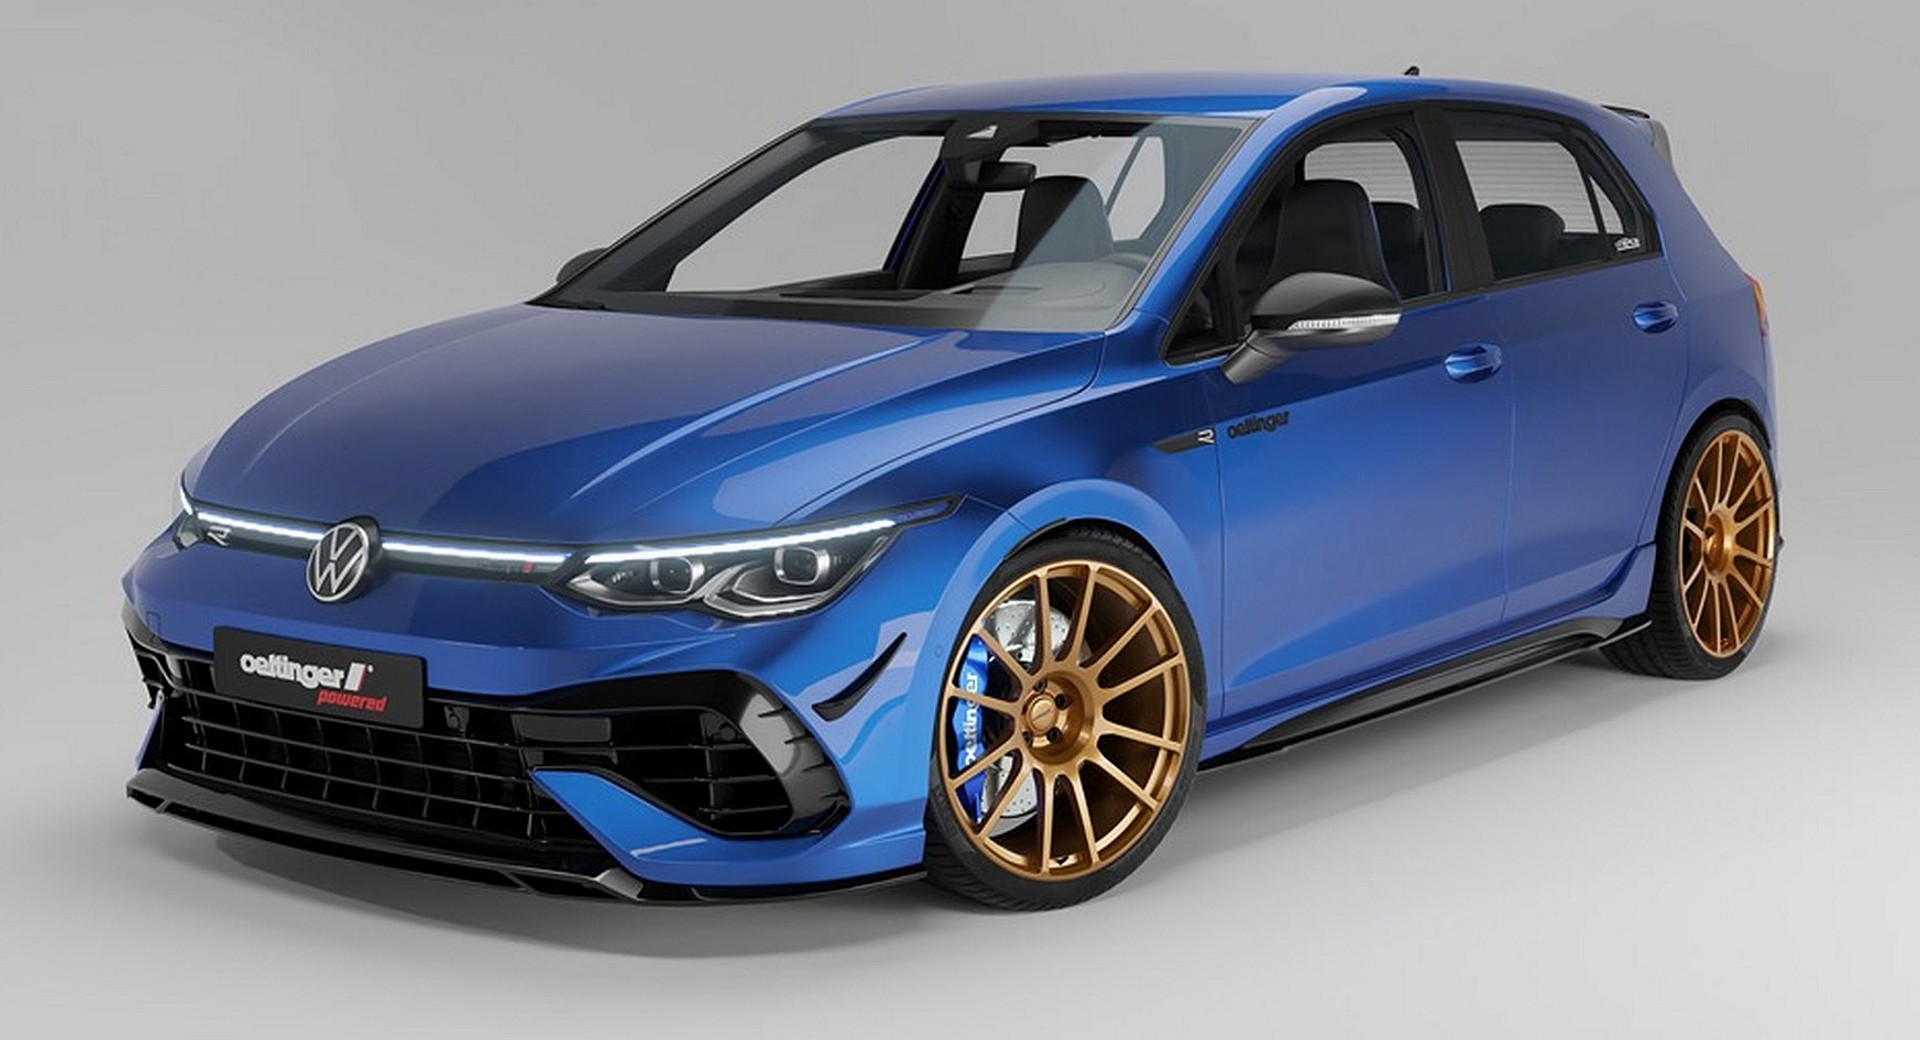 VW Golf R Spiced Up With Subtle Bodykit And Forged Wheels By